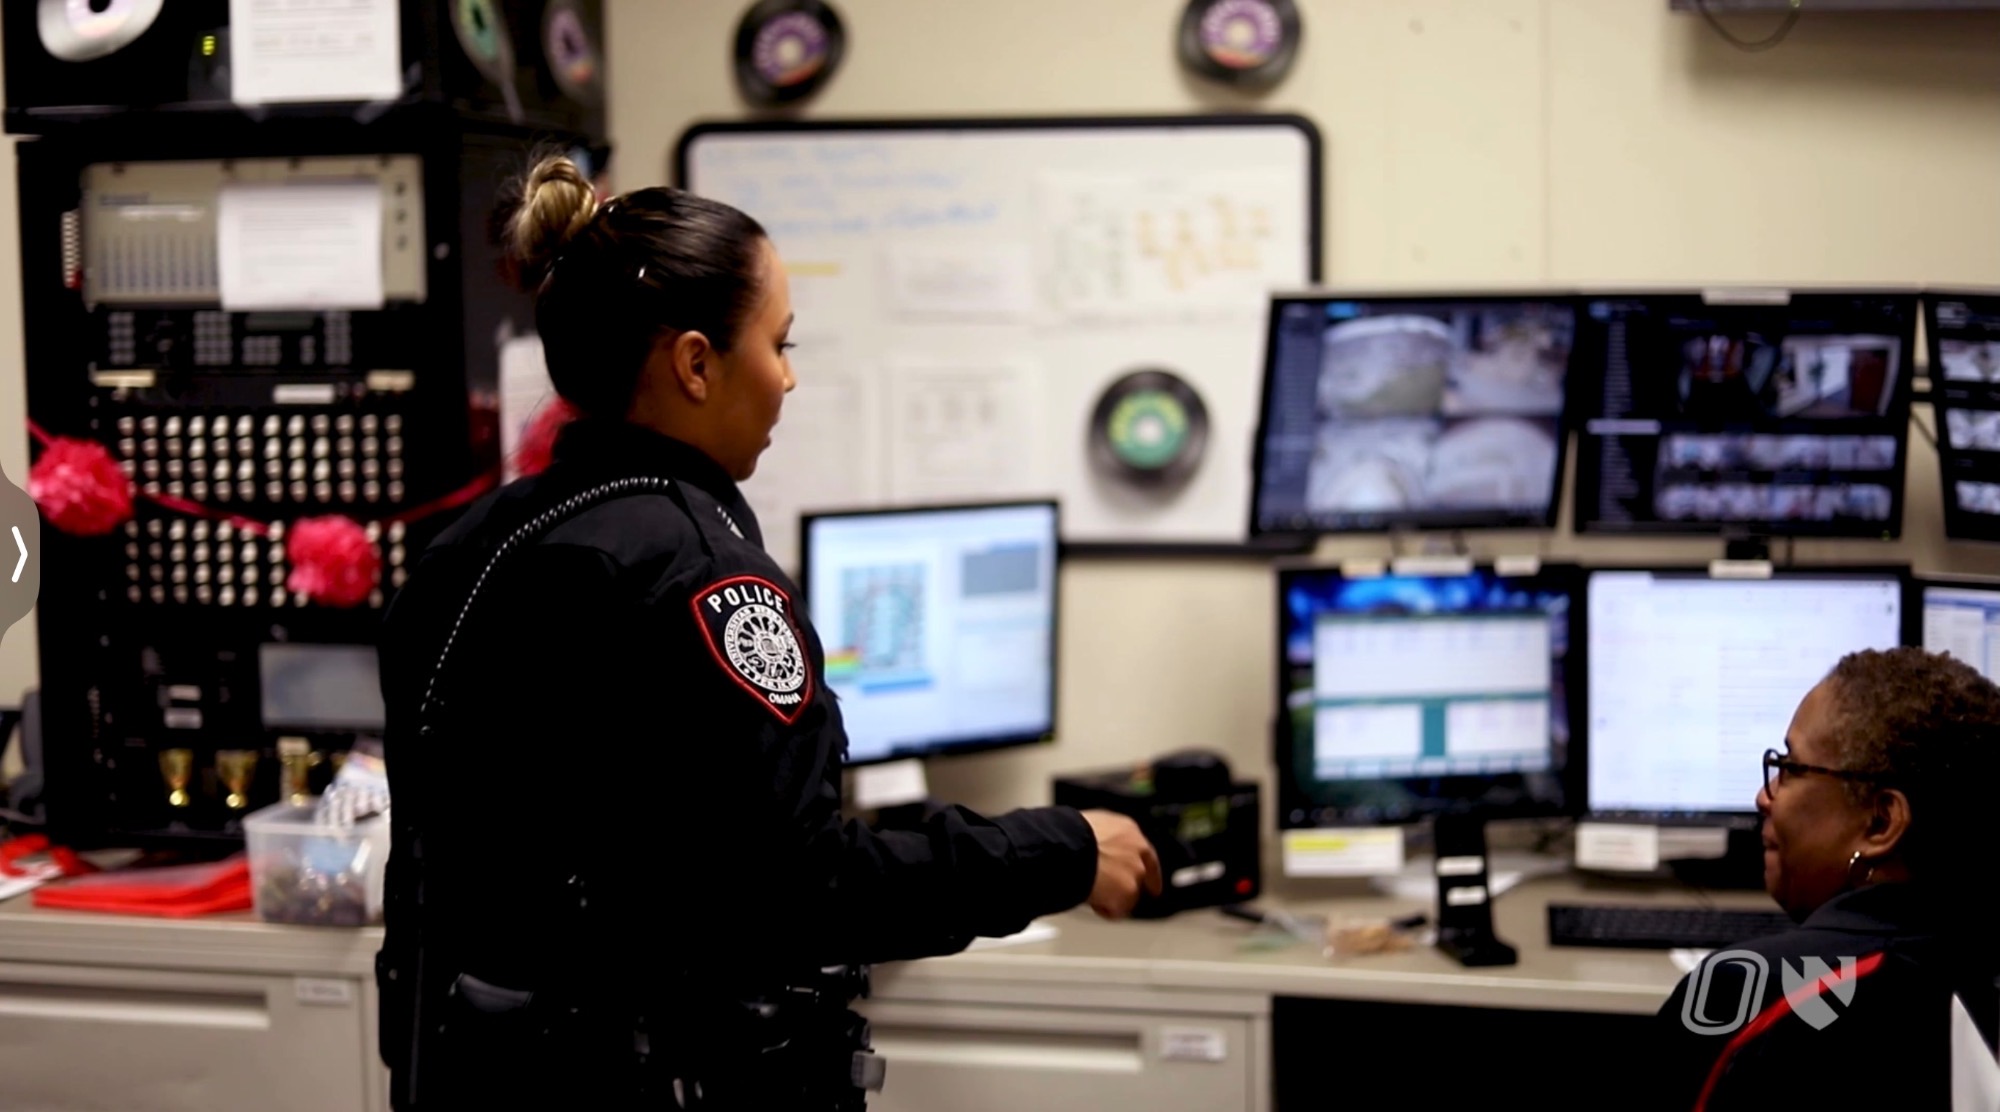 Campus police officer speaking with a UNO dispatcher